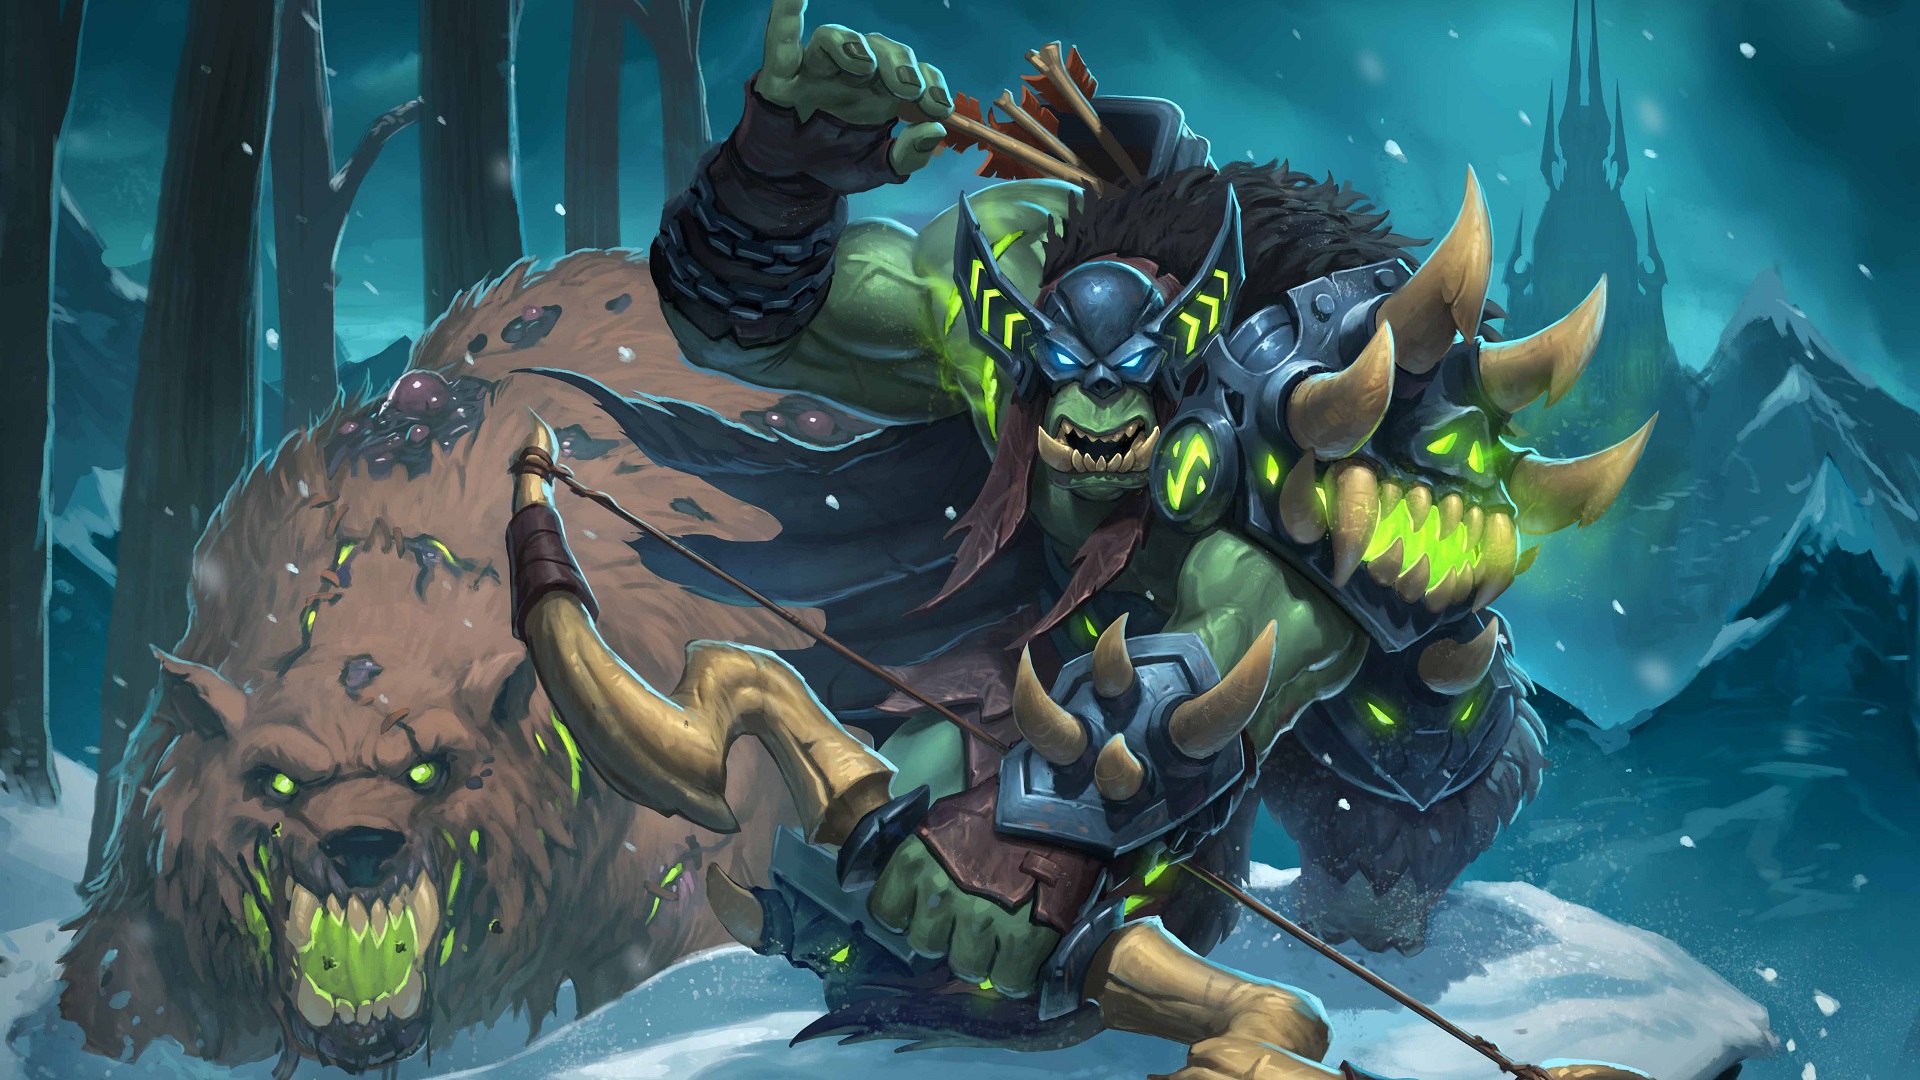 Rexxar, Hearthstone: Heroes of Warcraft, Hearthstone, Warcraft, Cards, Artwork, Knights of the frozen throne, Death Knight, Video games, Misha Wallpaper